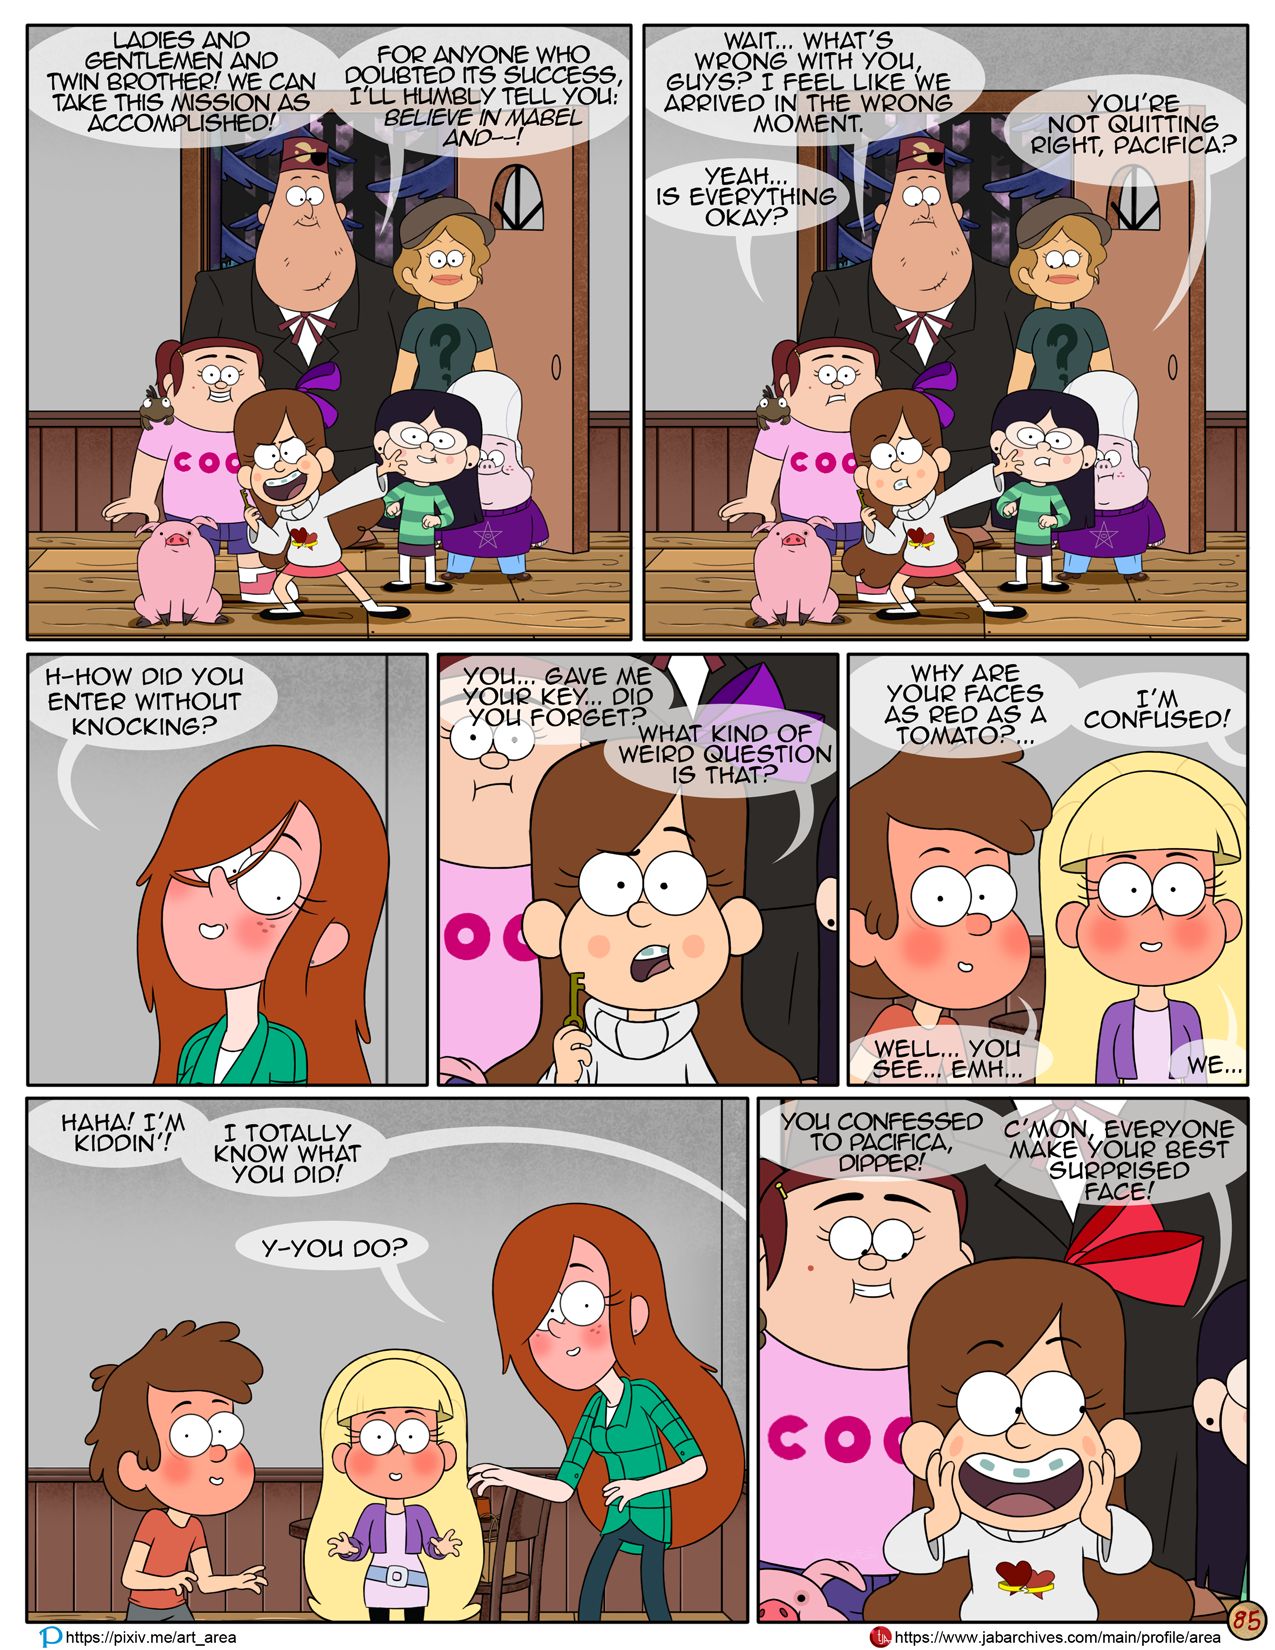 Dipper Pines and Pacifica Northwest sex porn comic on cartoon Gravity Falls...